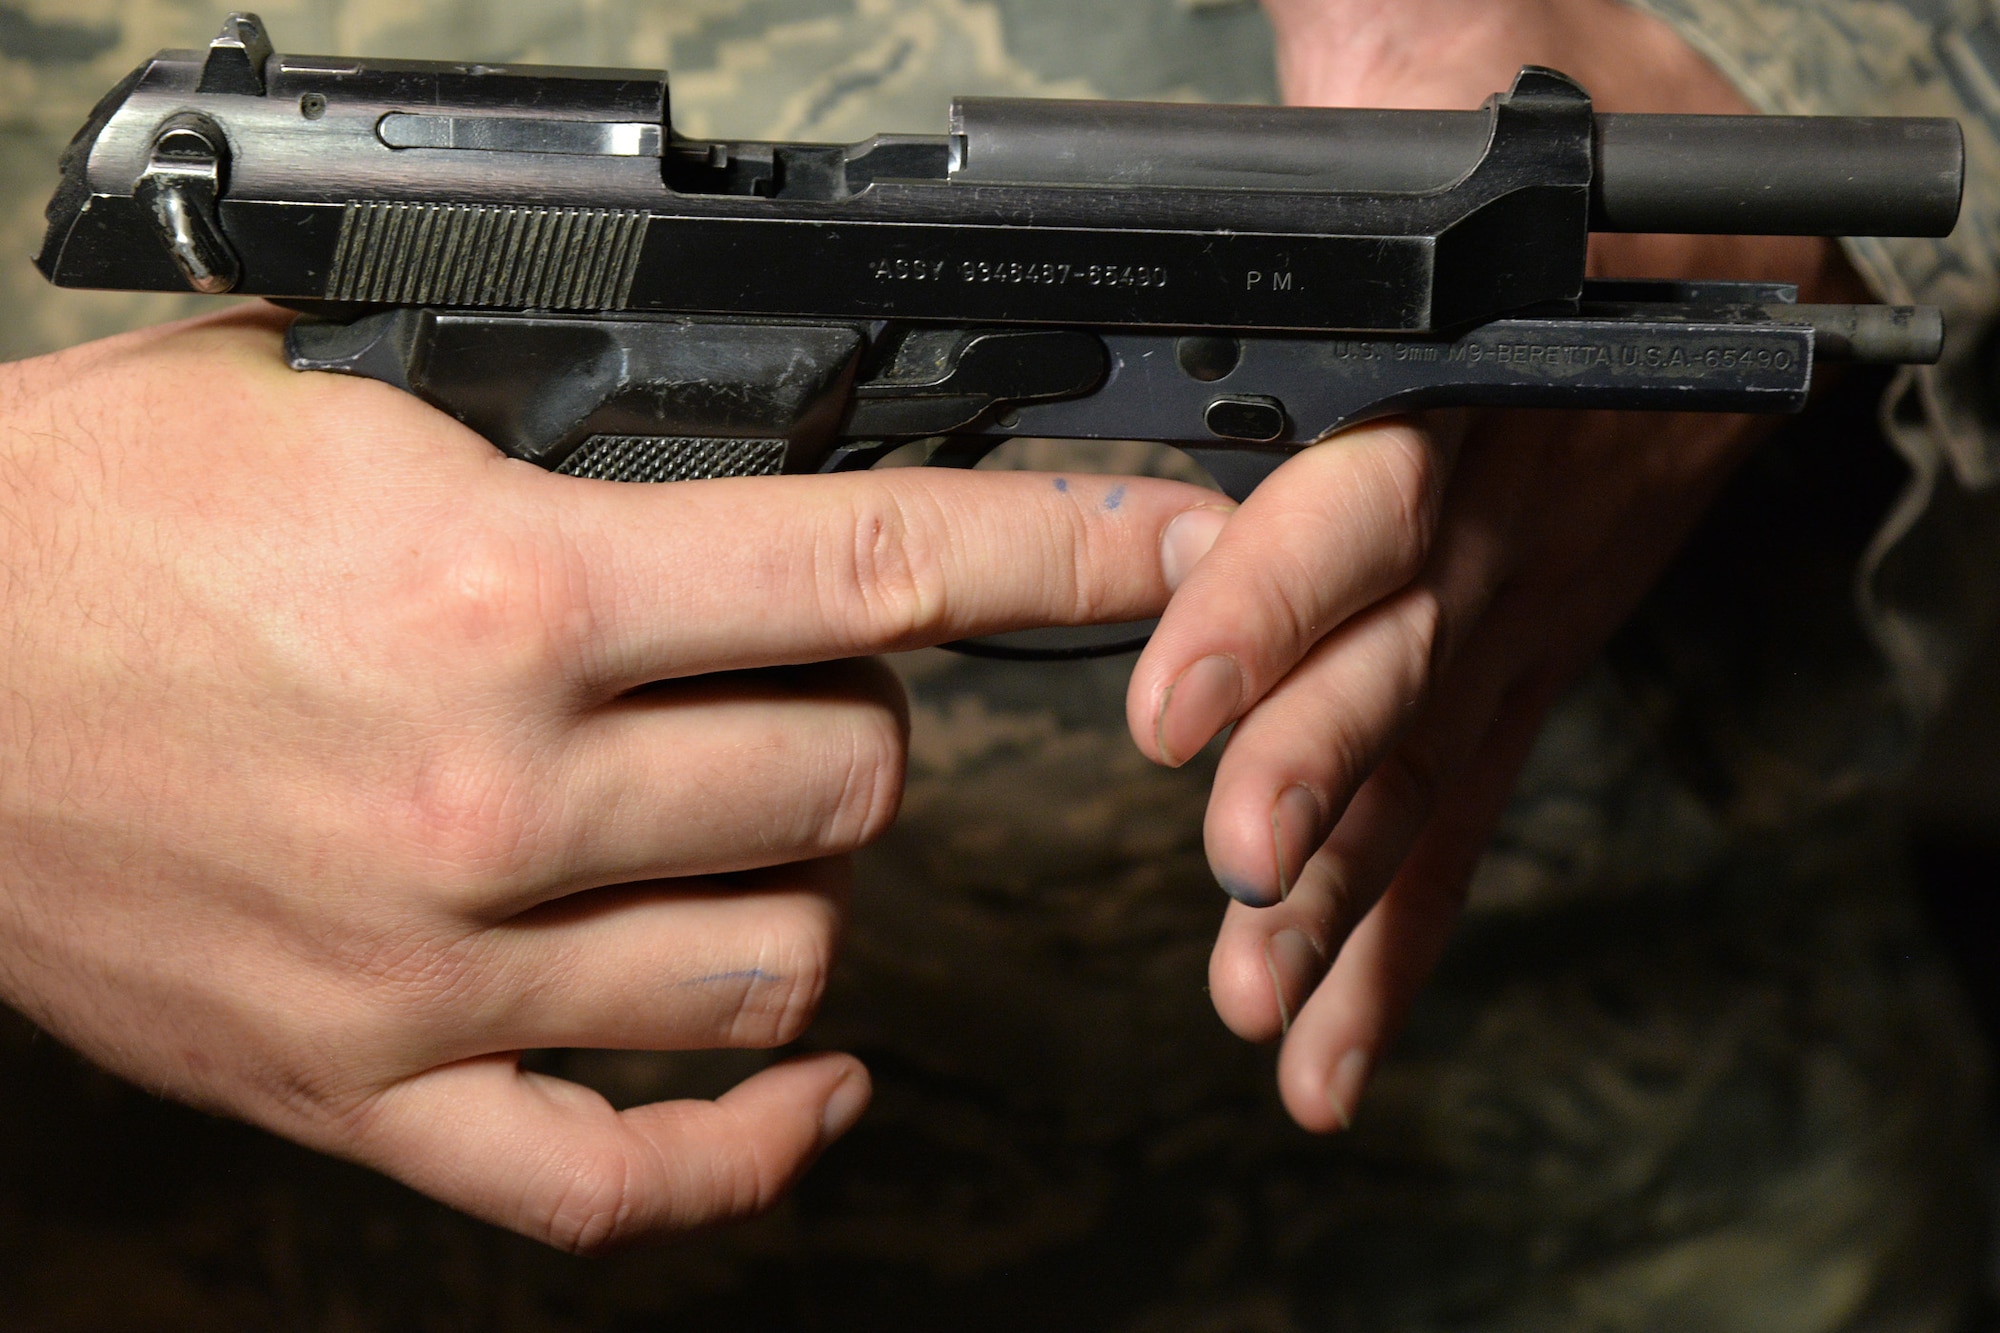 Senior Airman Tyler Merrill, 341st Security Forces Support Squadron armorer, demonstrates pointing a weapon in a safe direction June 9, 2017, at Malmstrom Air Force Base, Mont. A safe direction means the weapon is pointed so that even if an accidental discharge did occur, it would not result in injury. (U.S. Air Force photo/Airman 1st Class Daniel Brosam)